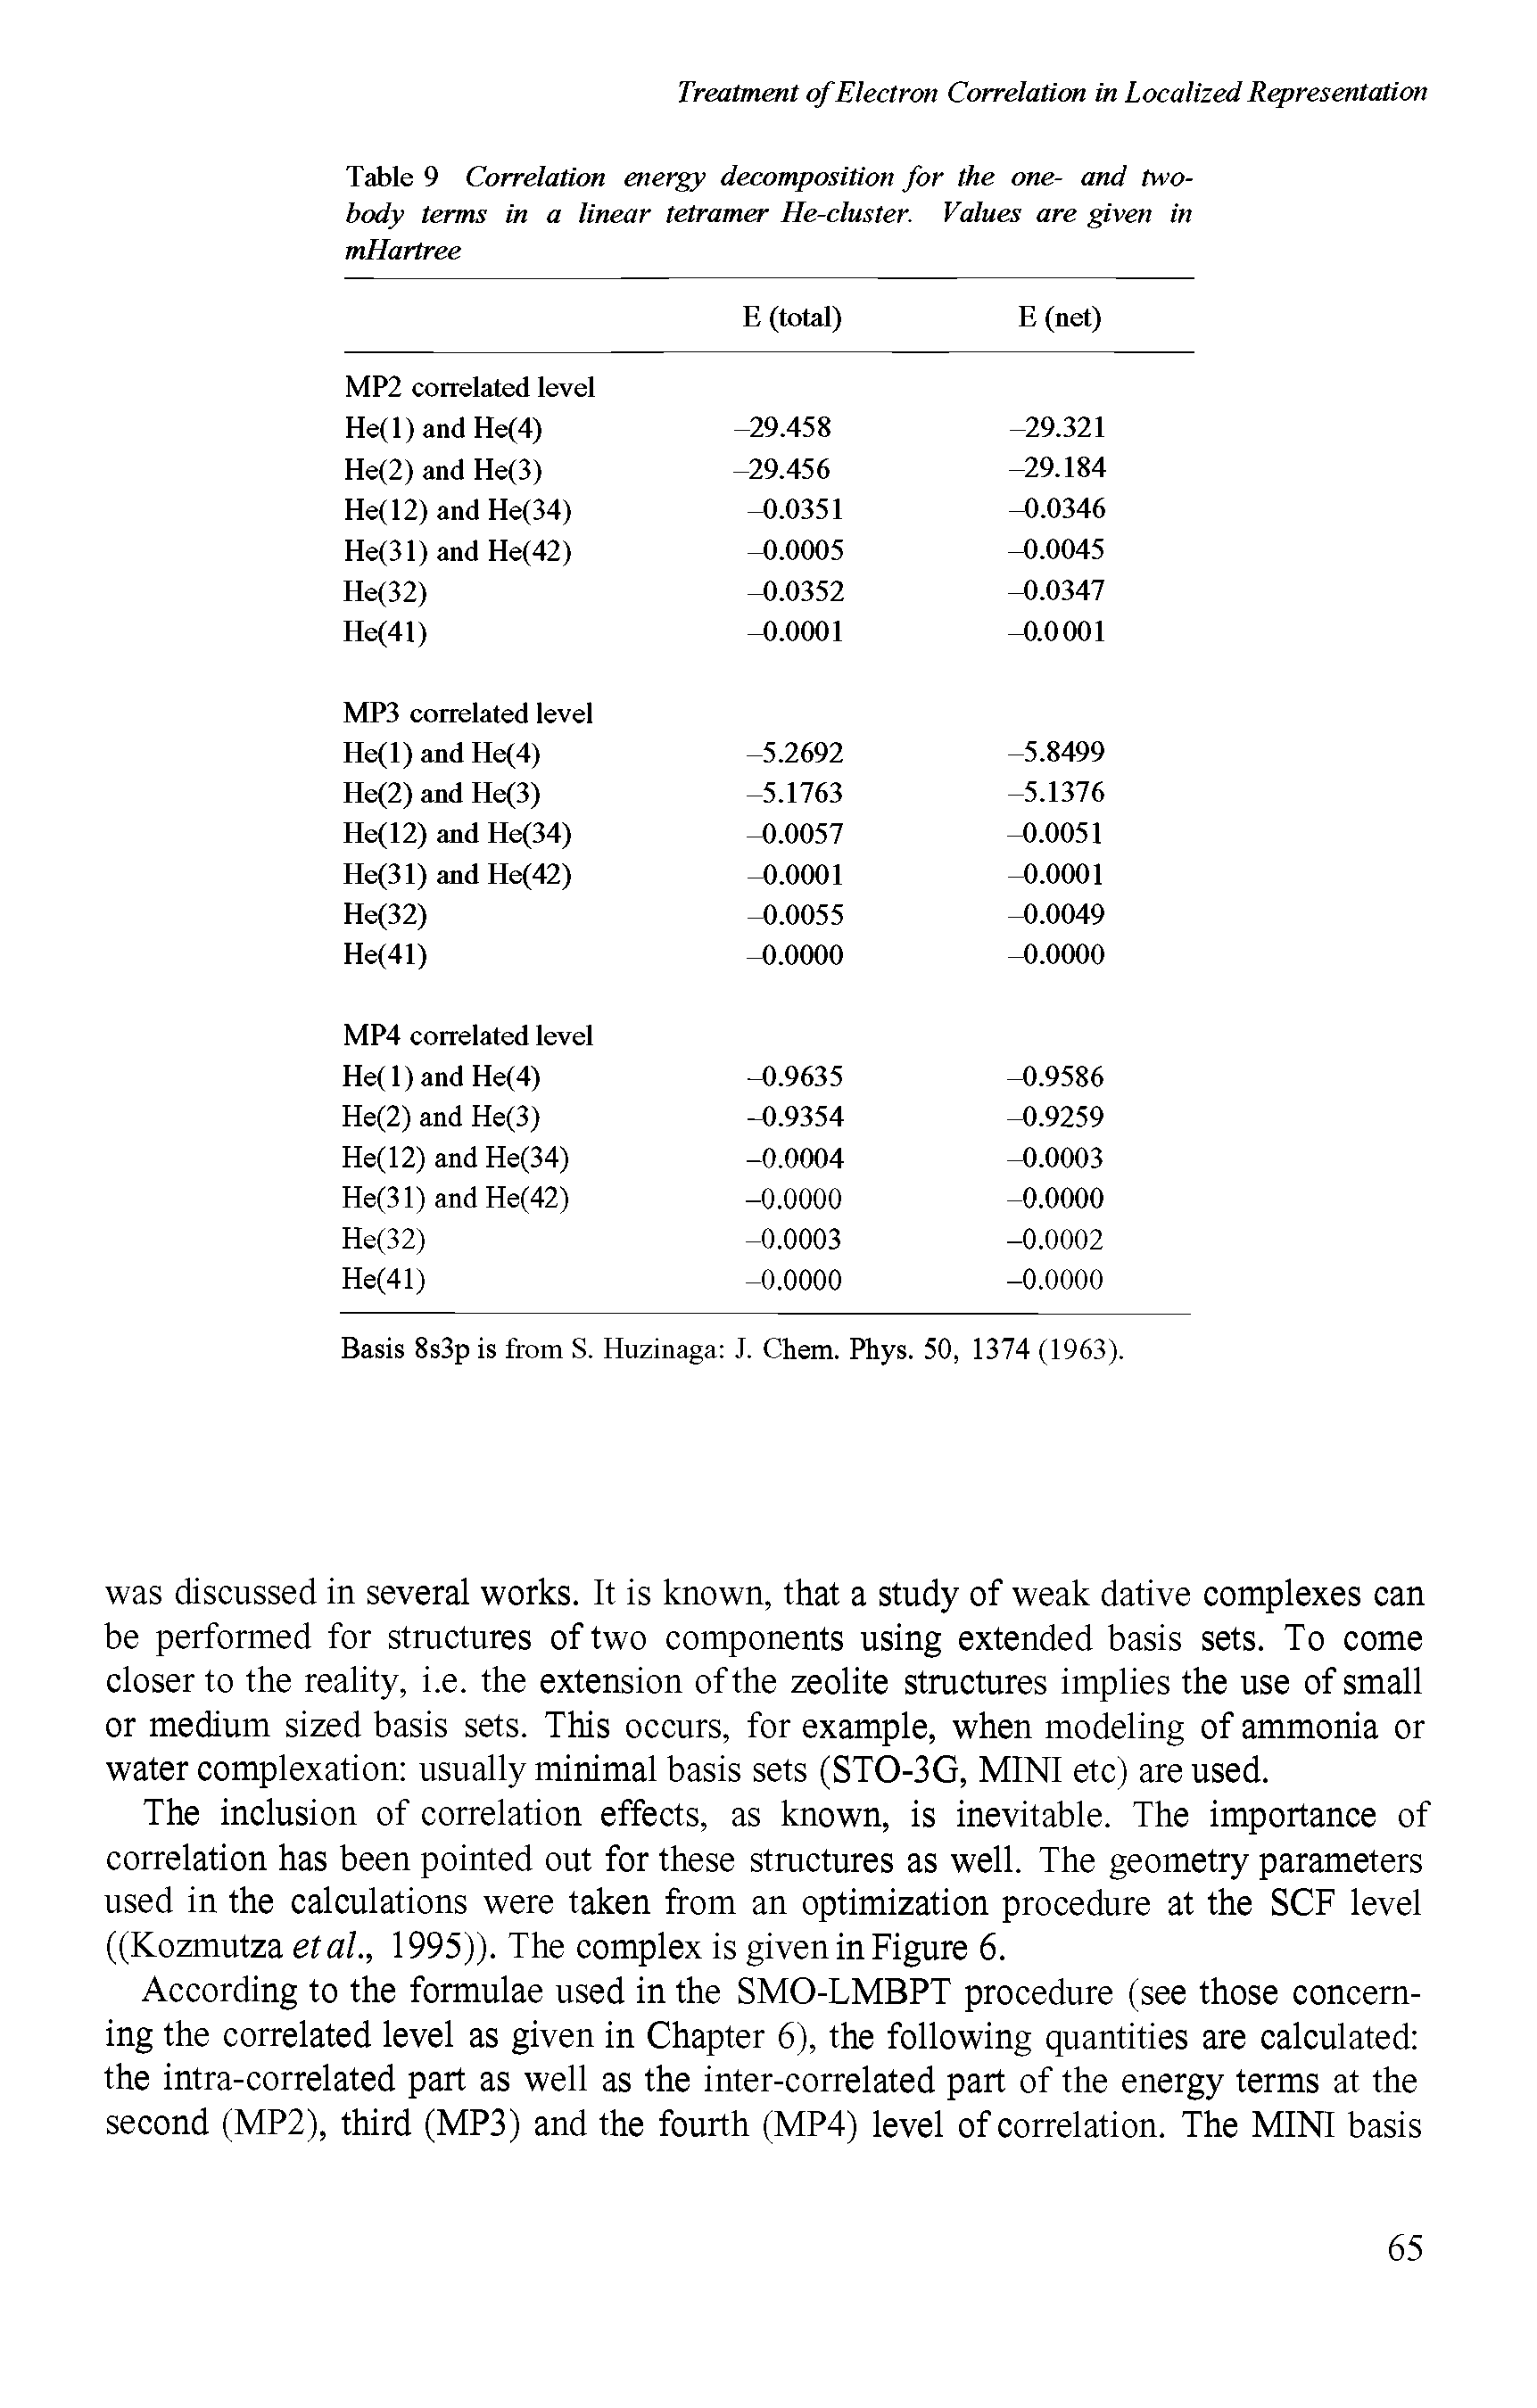 Table 9 Correlation energy decomposition for the one- and two-body terms in a linear tetramer He-cluster. Values are given in mHartree...